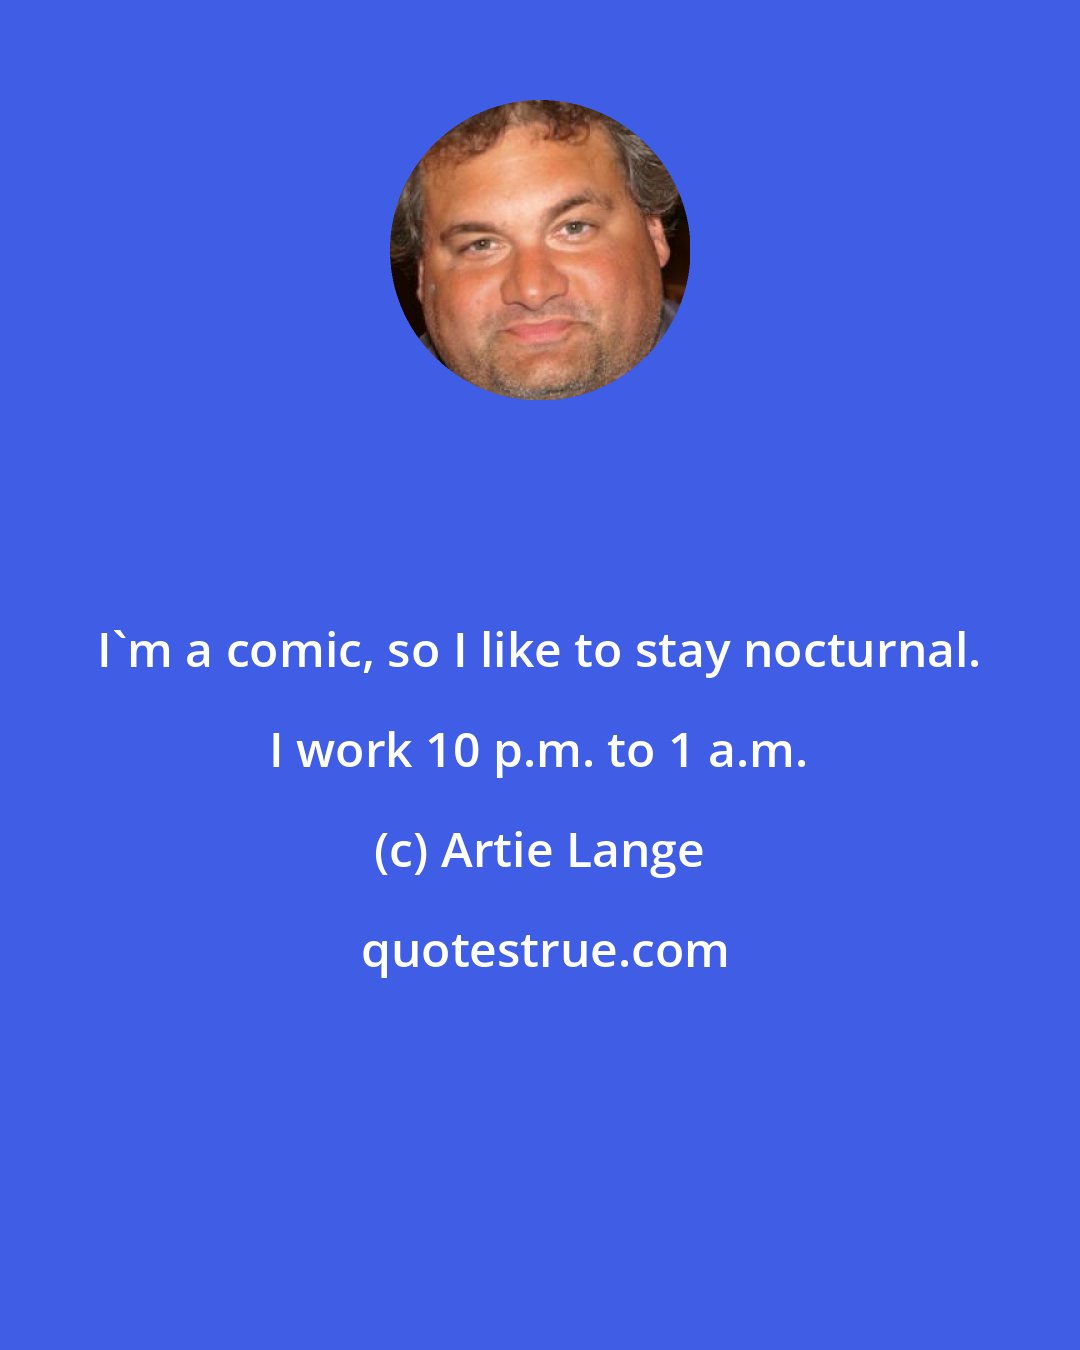 Artie Lange: I'm a comic, so I like to stay nocturnal. I work 10 p.m. to 1 a.m.